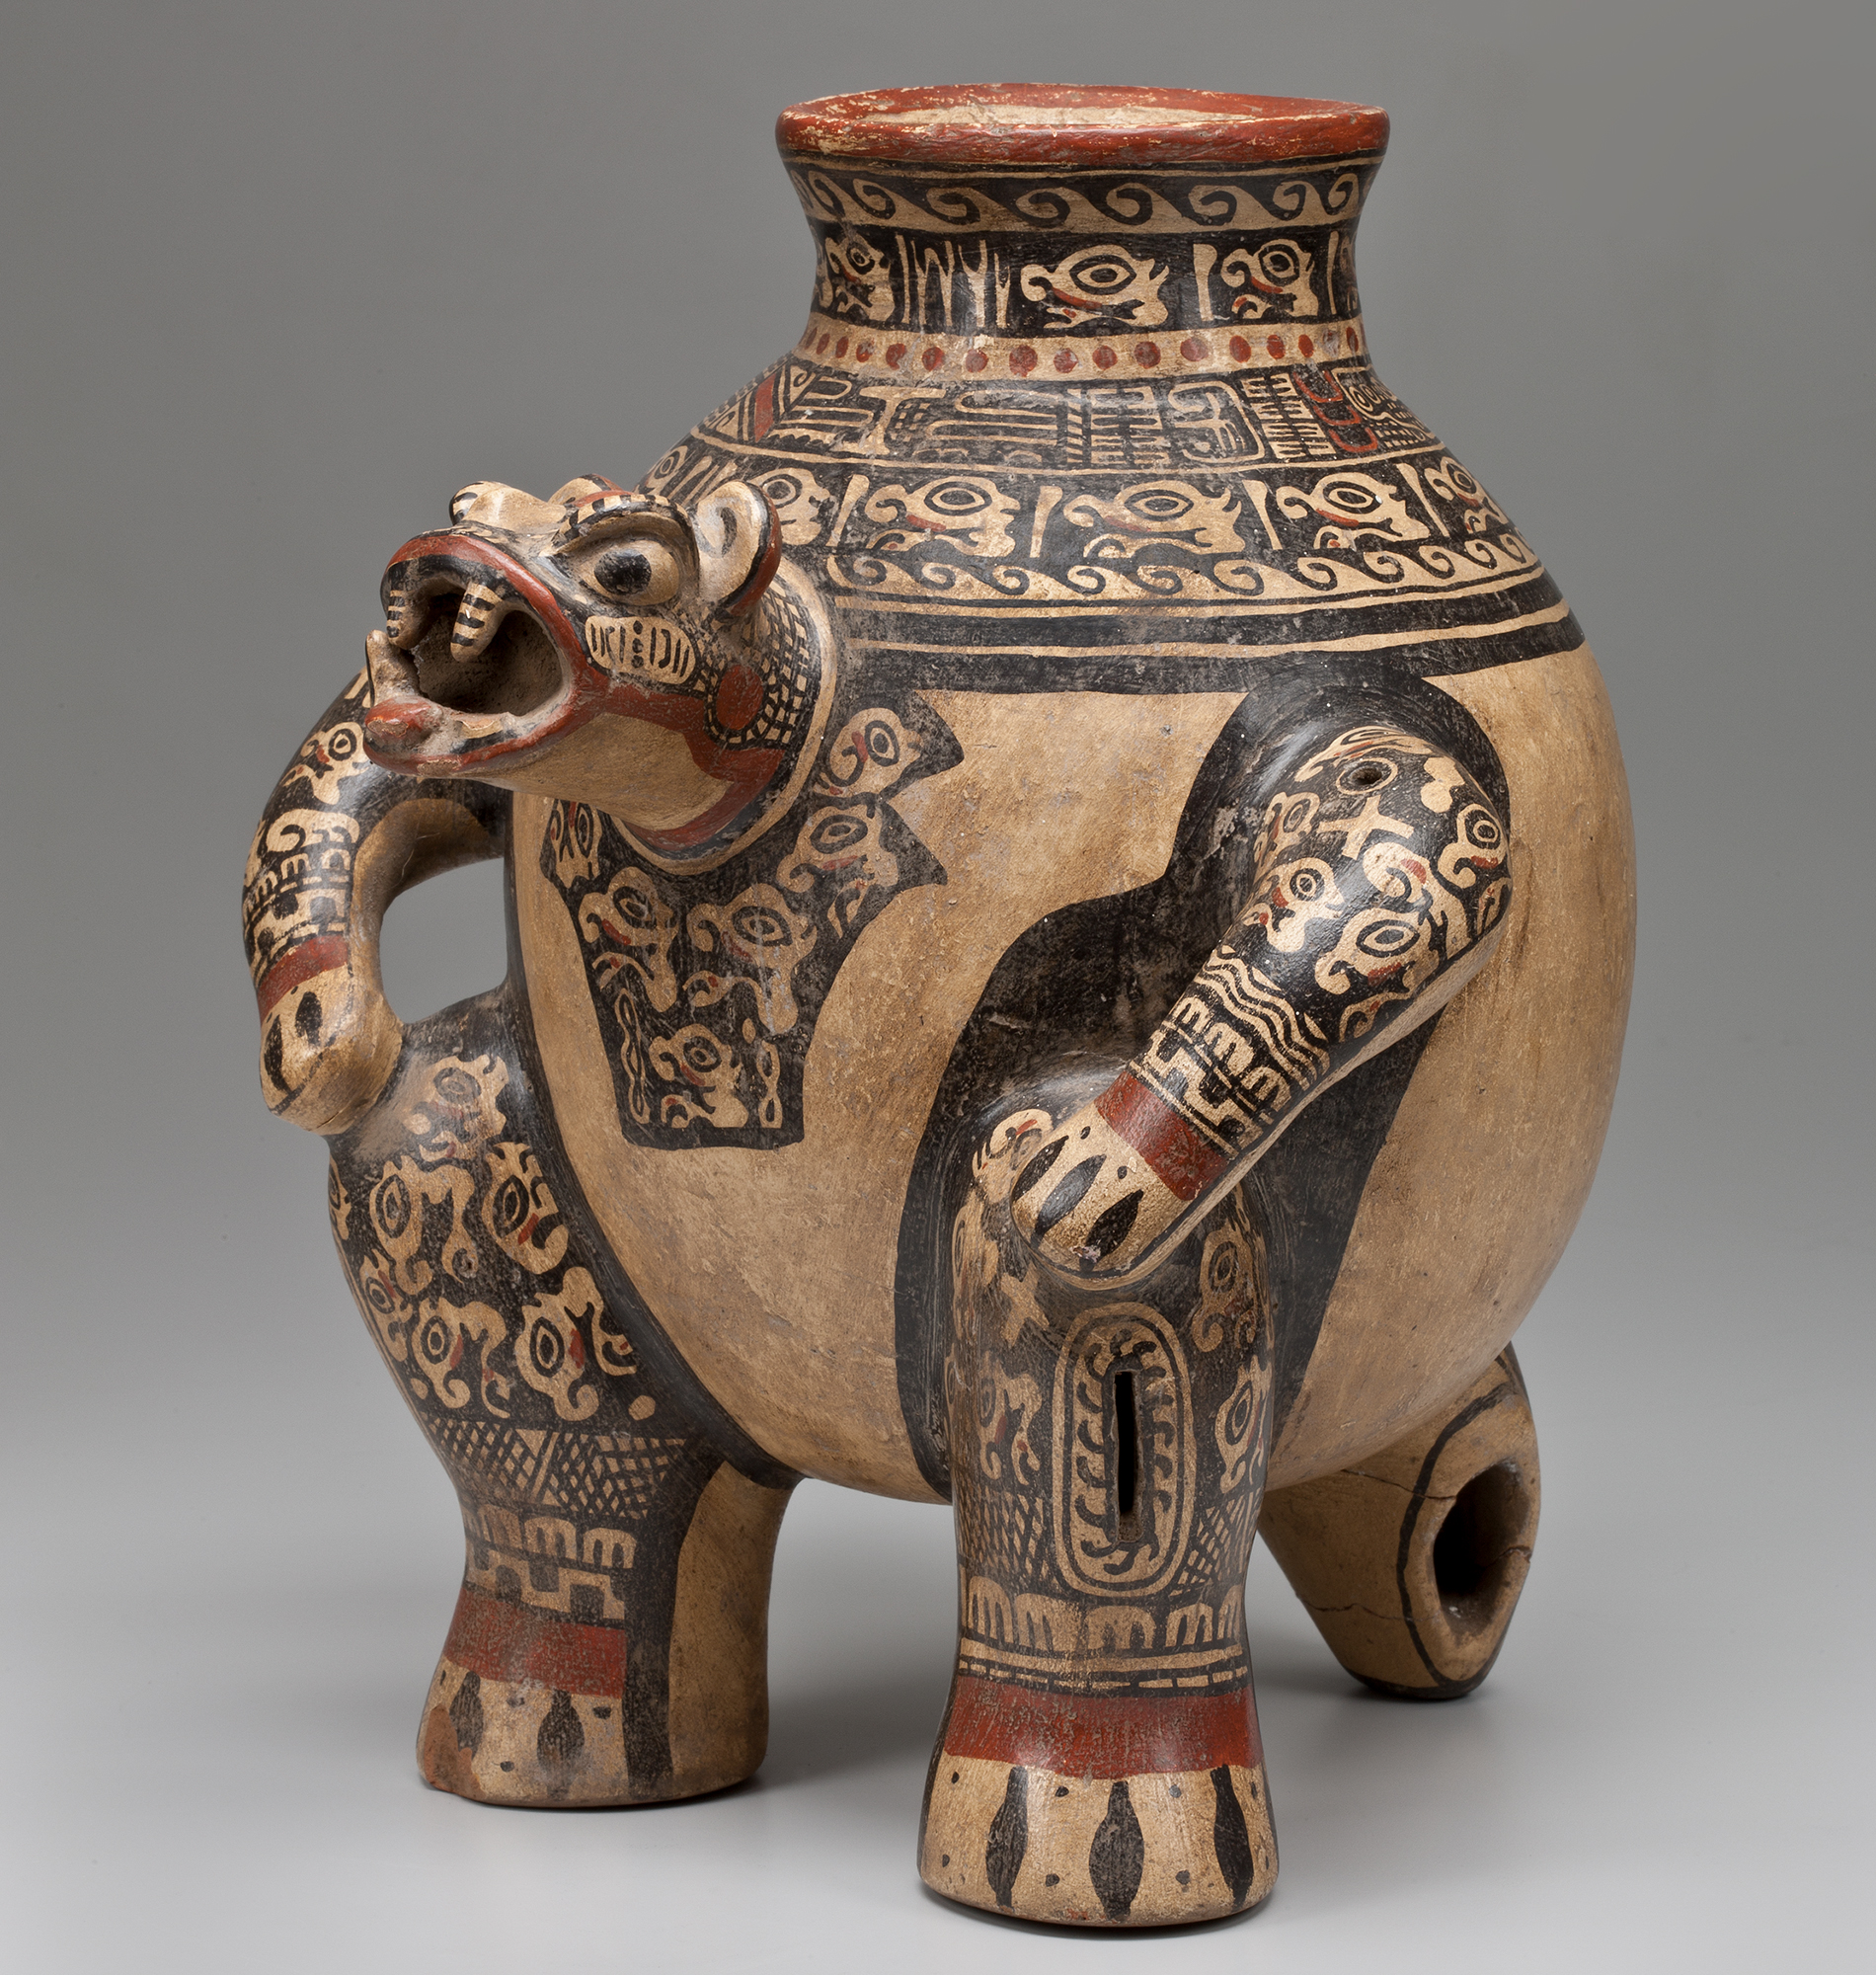 A painted jug with an animal head spout and two arms, supported by two feet and a tail